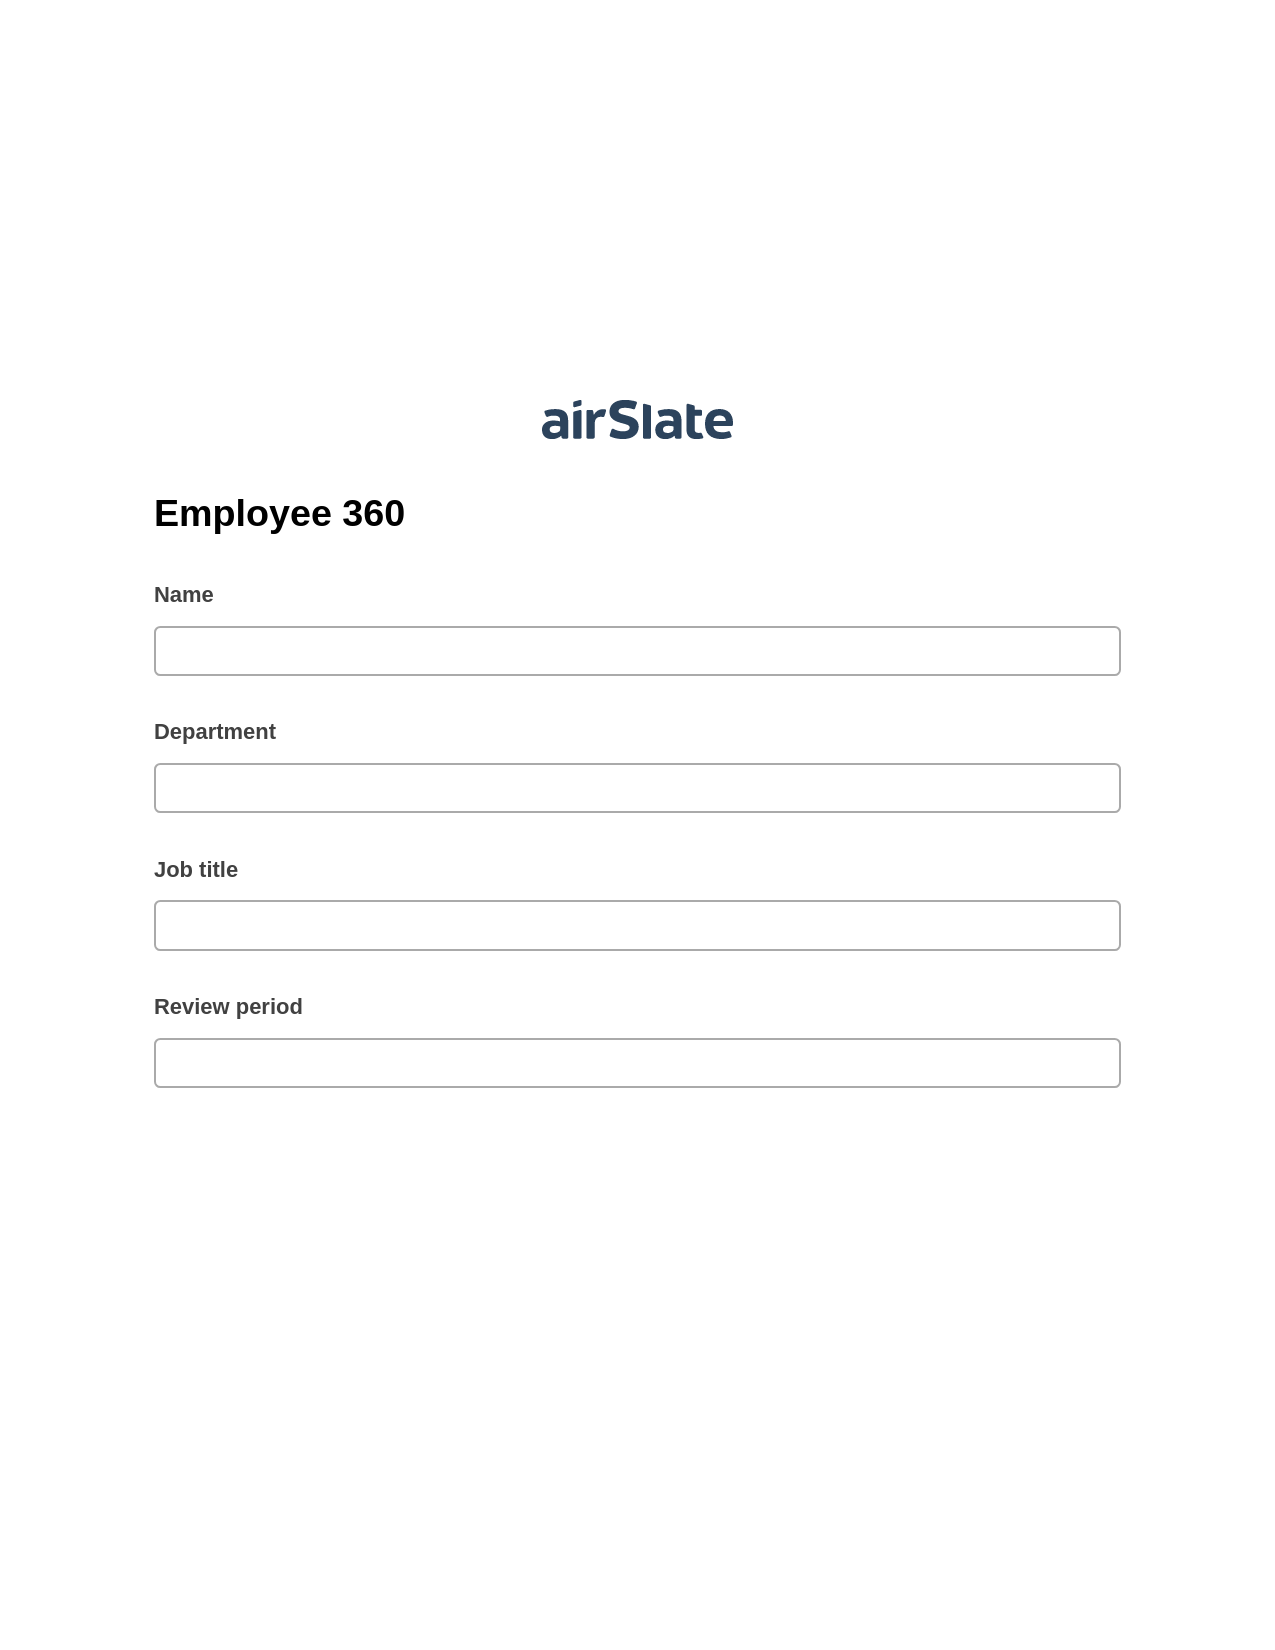 Employee 360 Pre-fill from MS Dynamics 365 Records, Export to MS Dynamics 365 Bot, Slack Two-Way Binding Bot